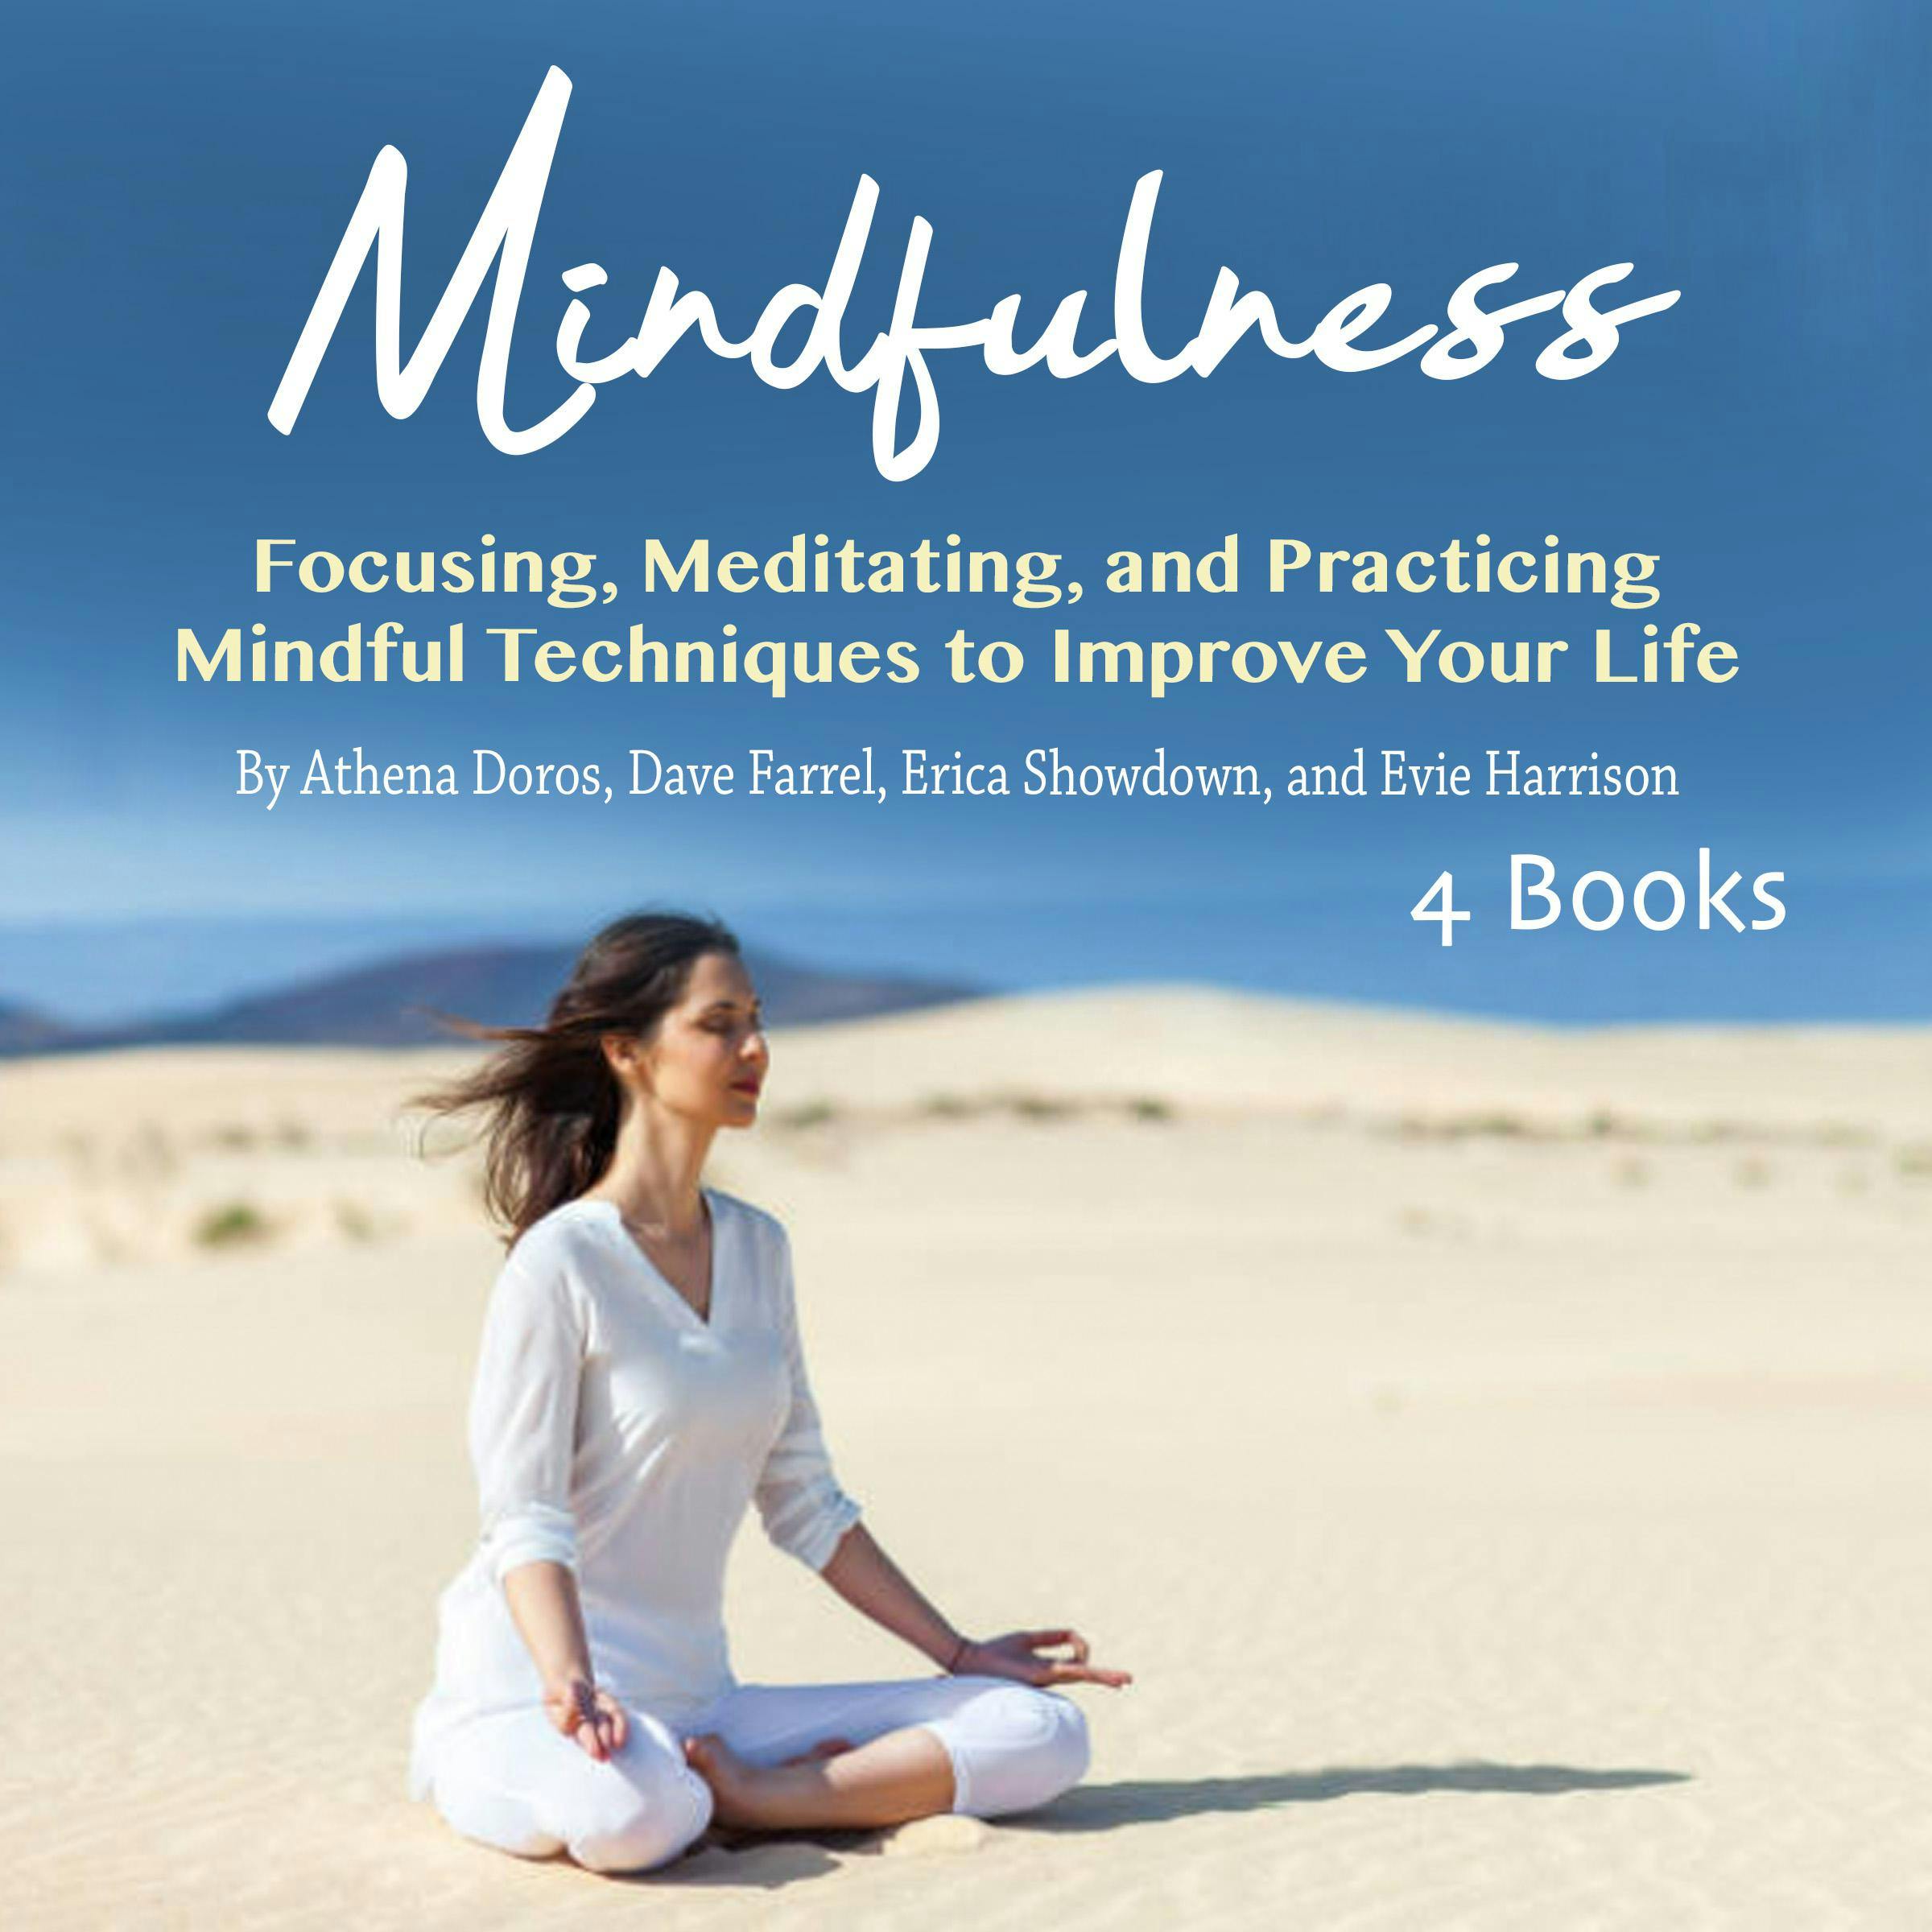 Mindfulness: Focusing, Meditating, and Practicing Mindful Techniques to Improve Your Life - Athena Doros, Erica Showdown, Dave Farrel, Evie Harrison